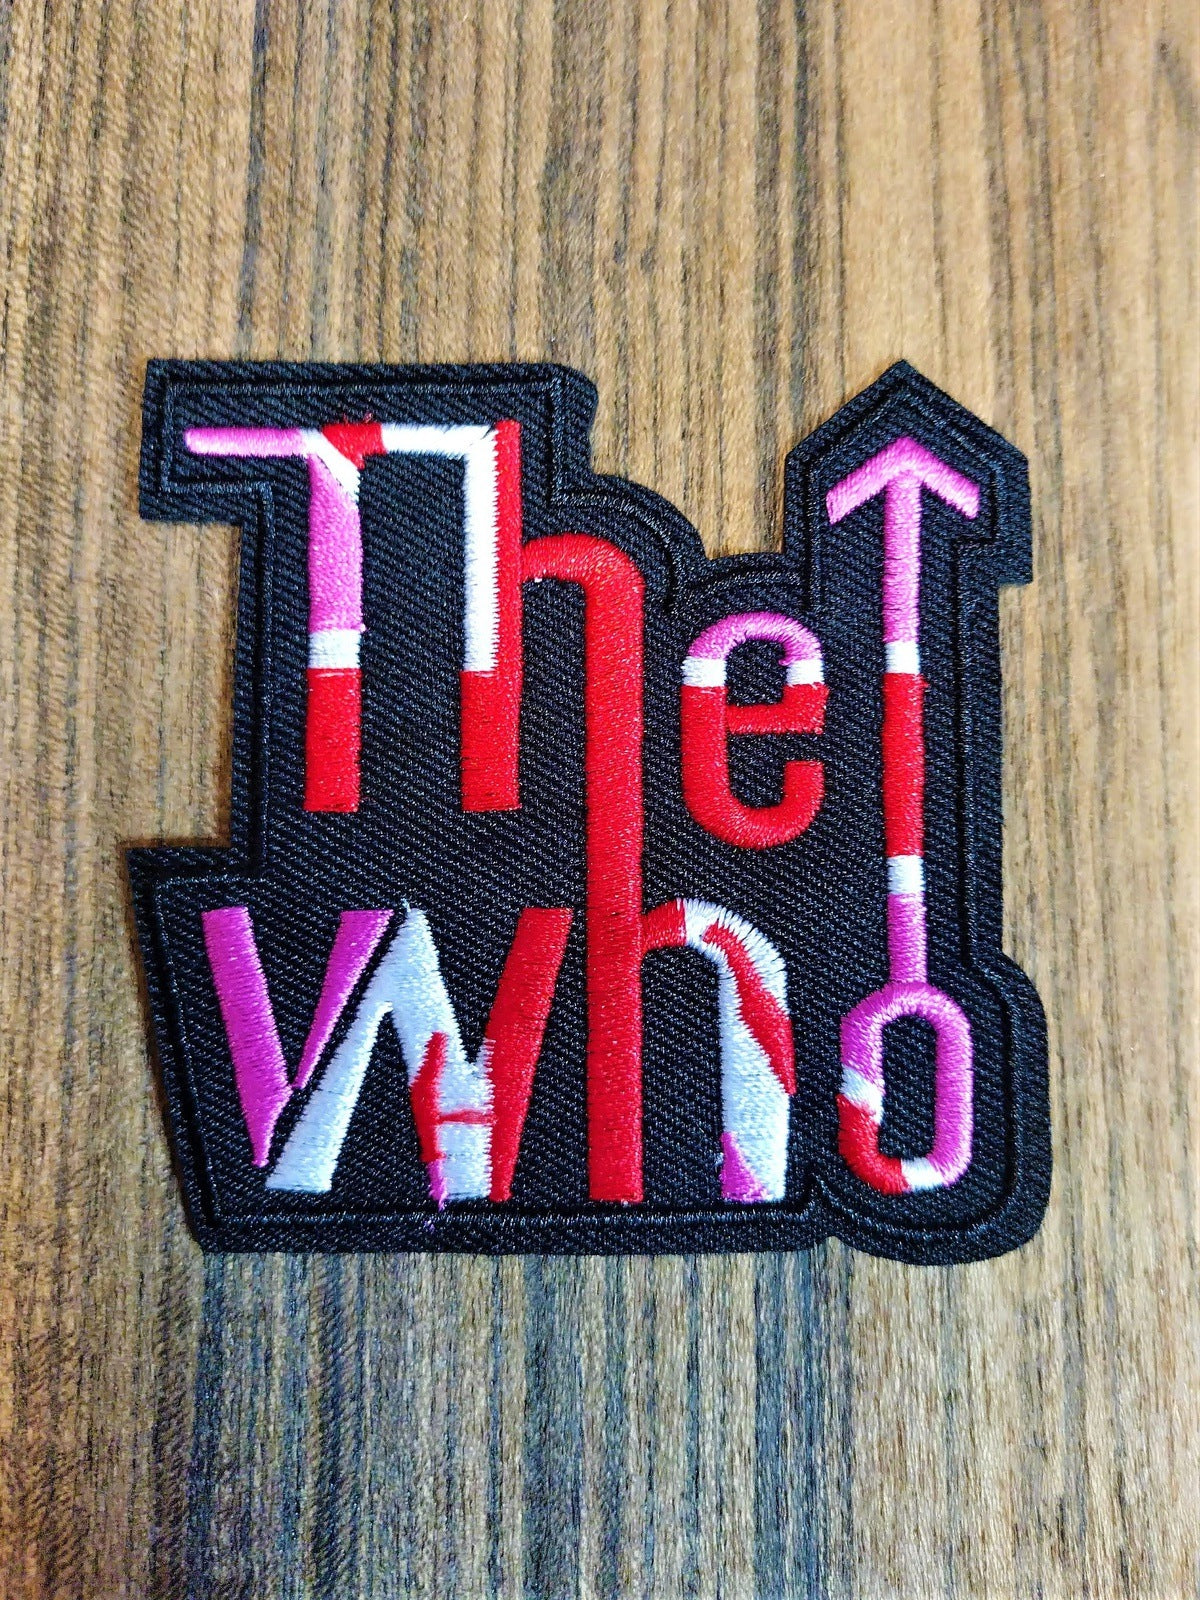 The Who Patch approx. 3 inches X 3 inches